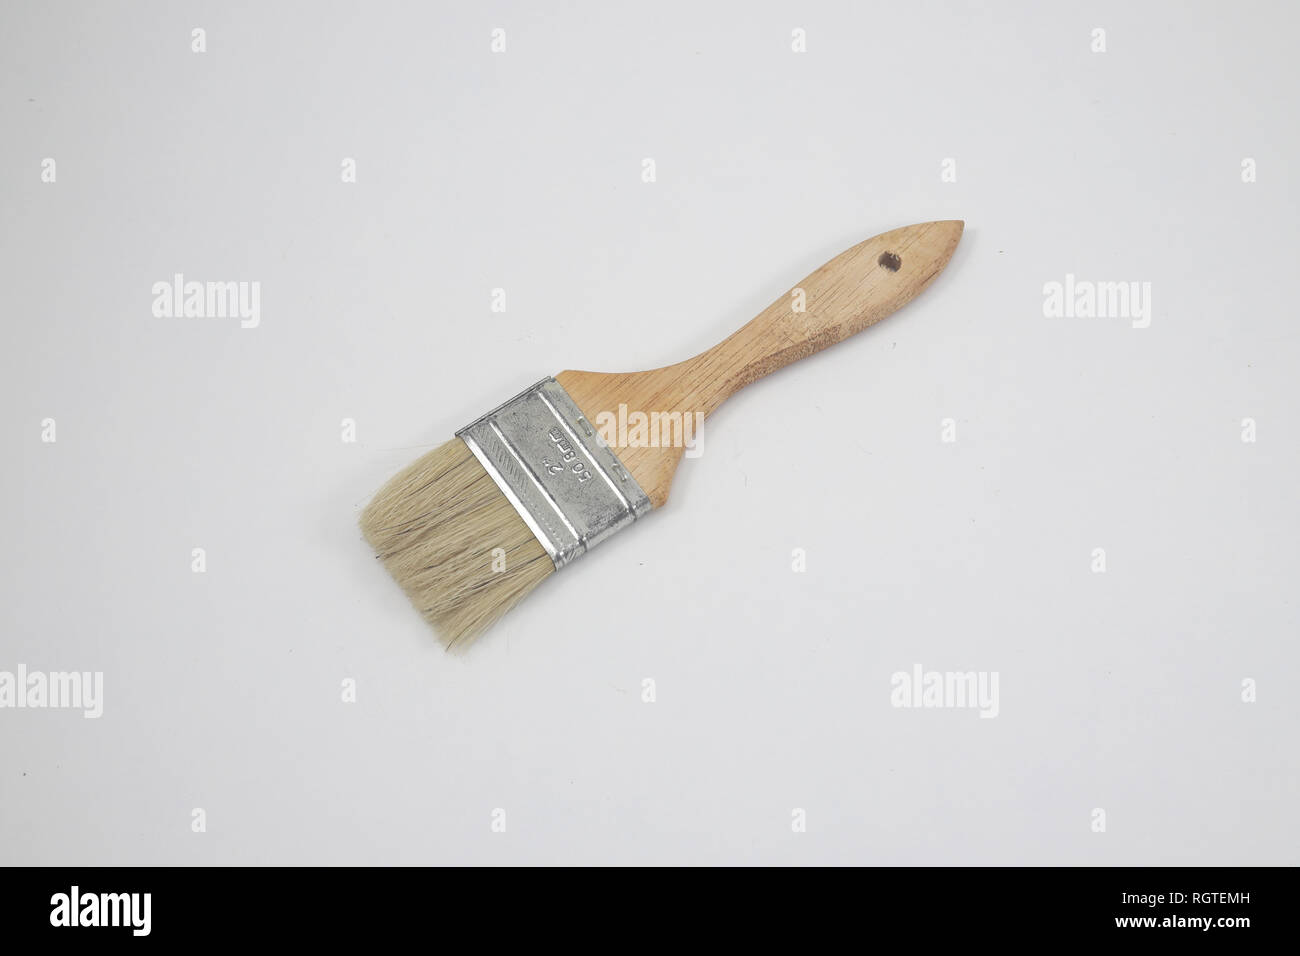 clean generic paint brush on white background used for painting, art and crafts, home improvement Stock Photo